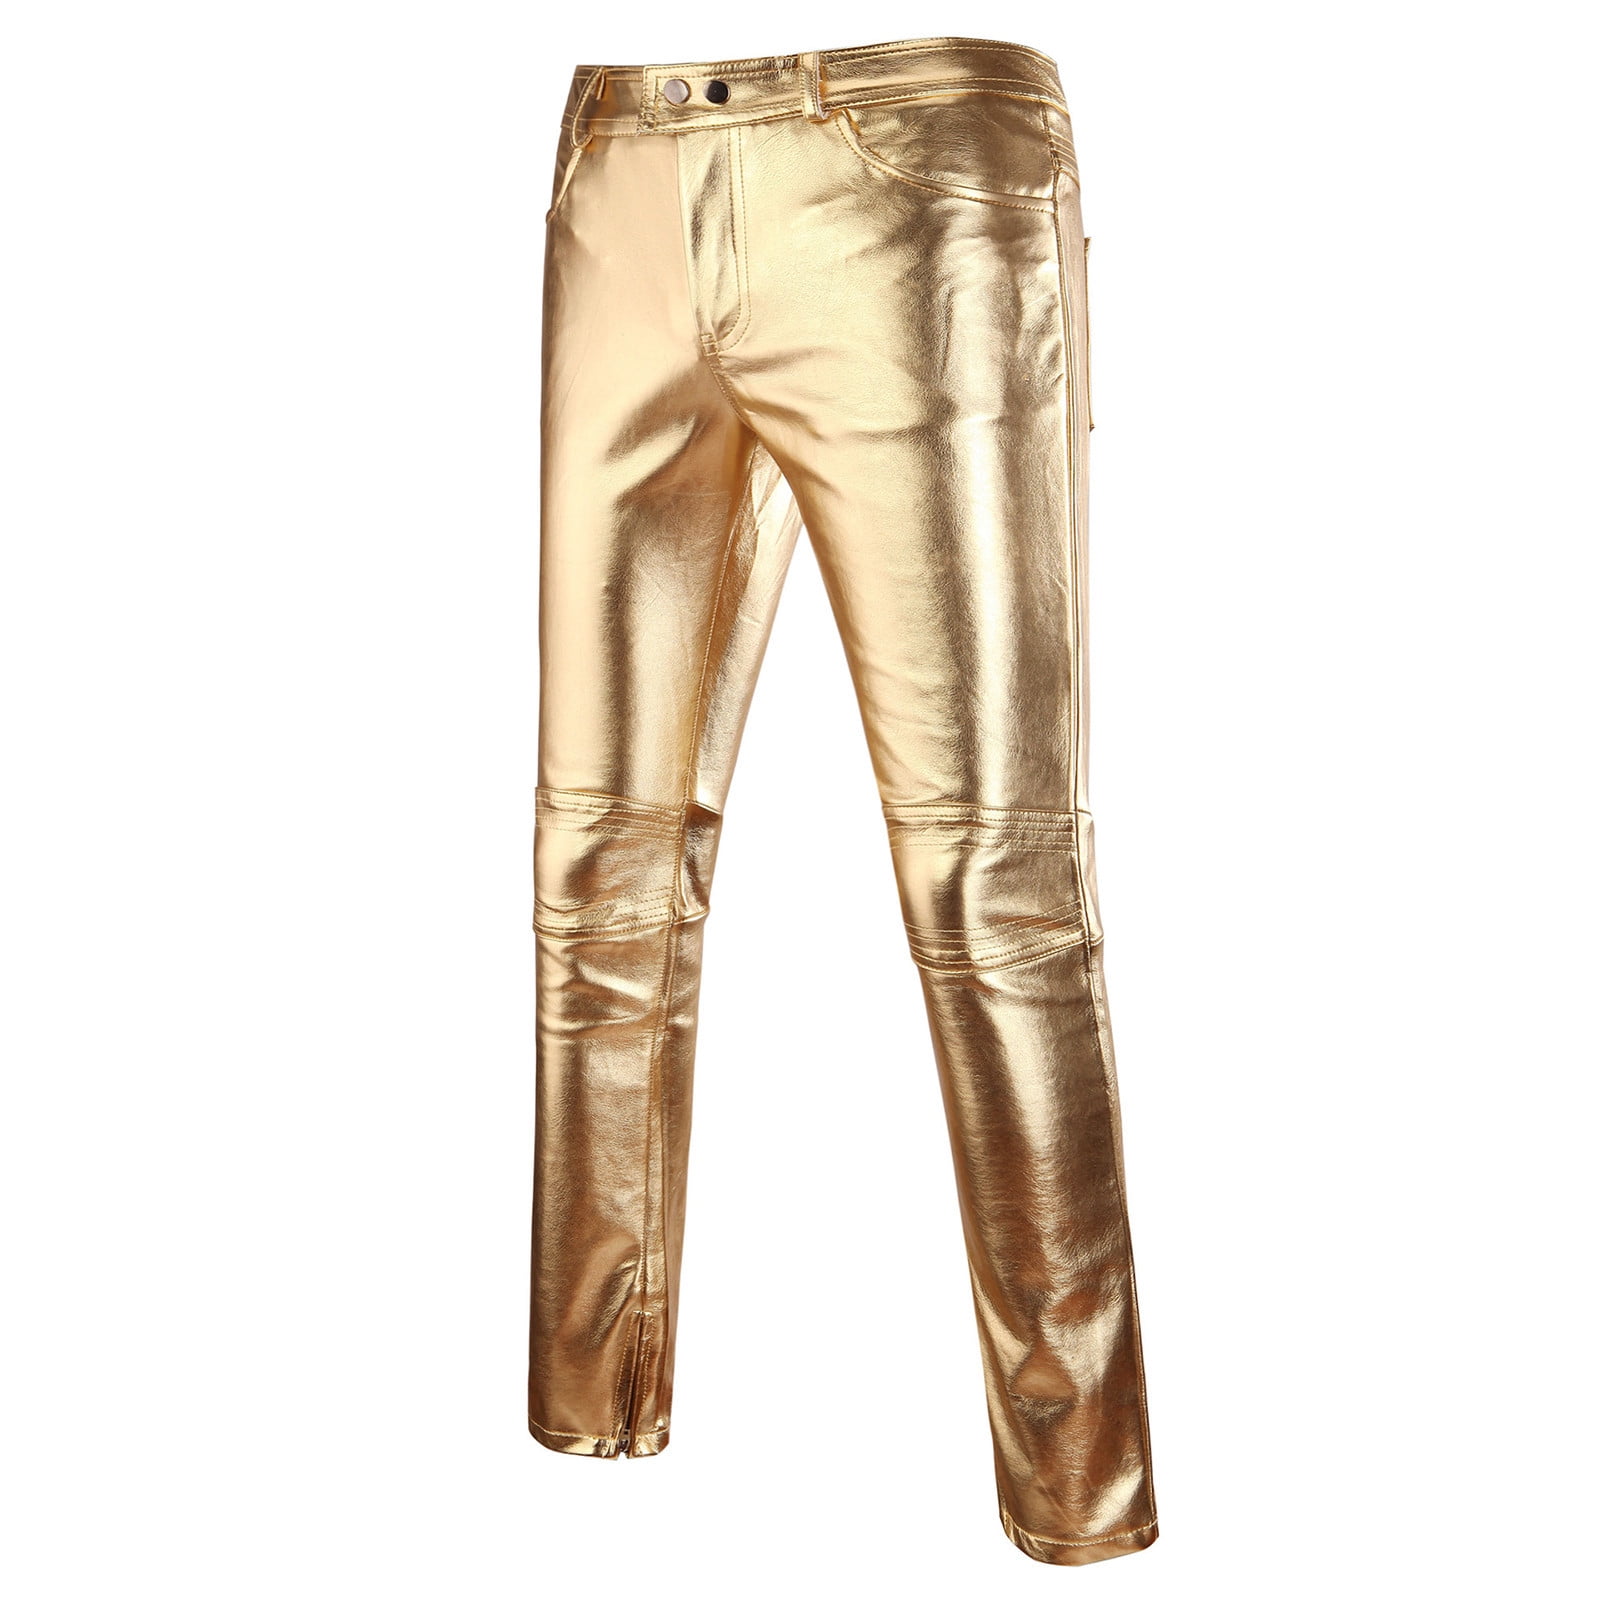 Vesta Pant in Gold Leather – Gabriela Hearst